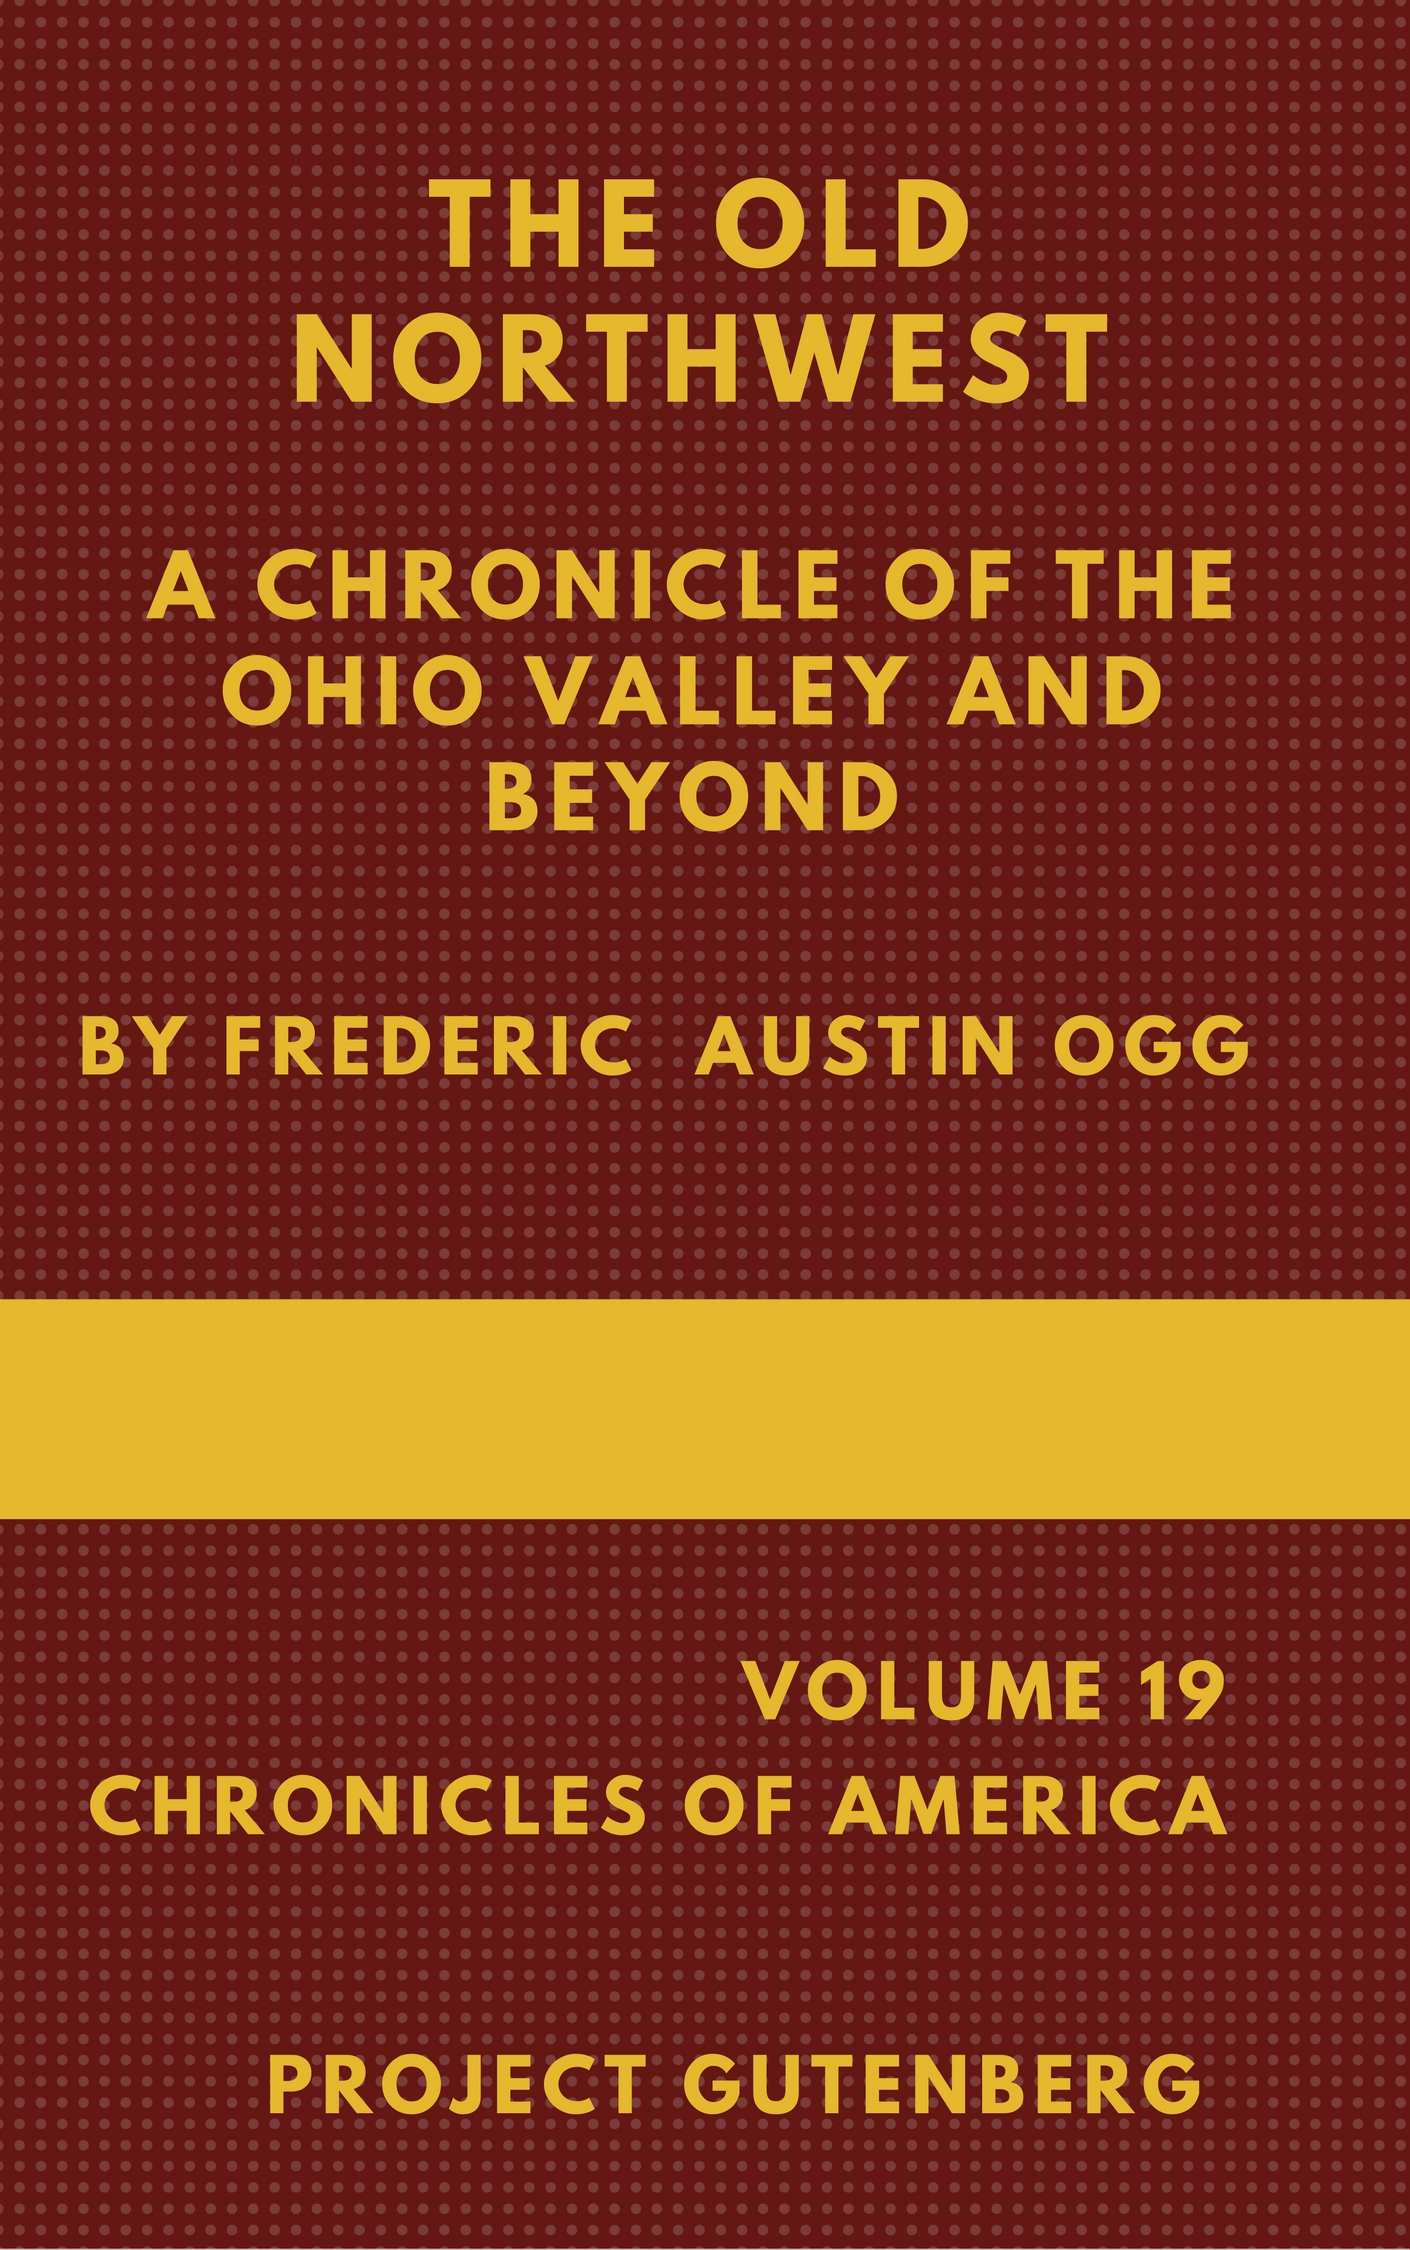 The Old Northwest: A Chronicle of the Ohio Valley and Beyond